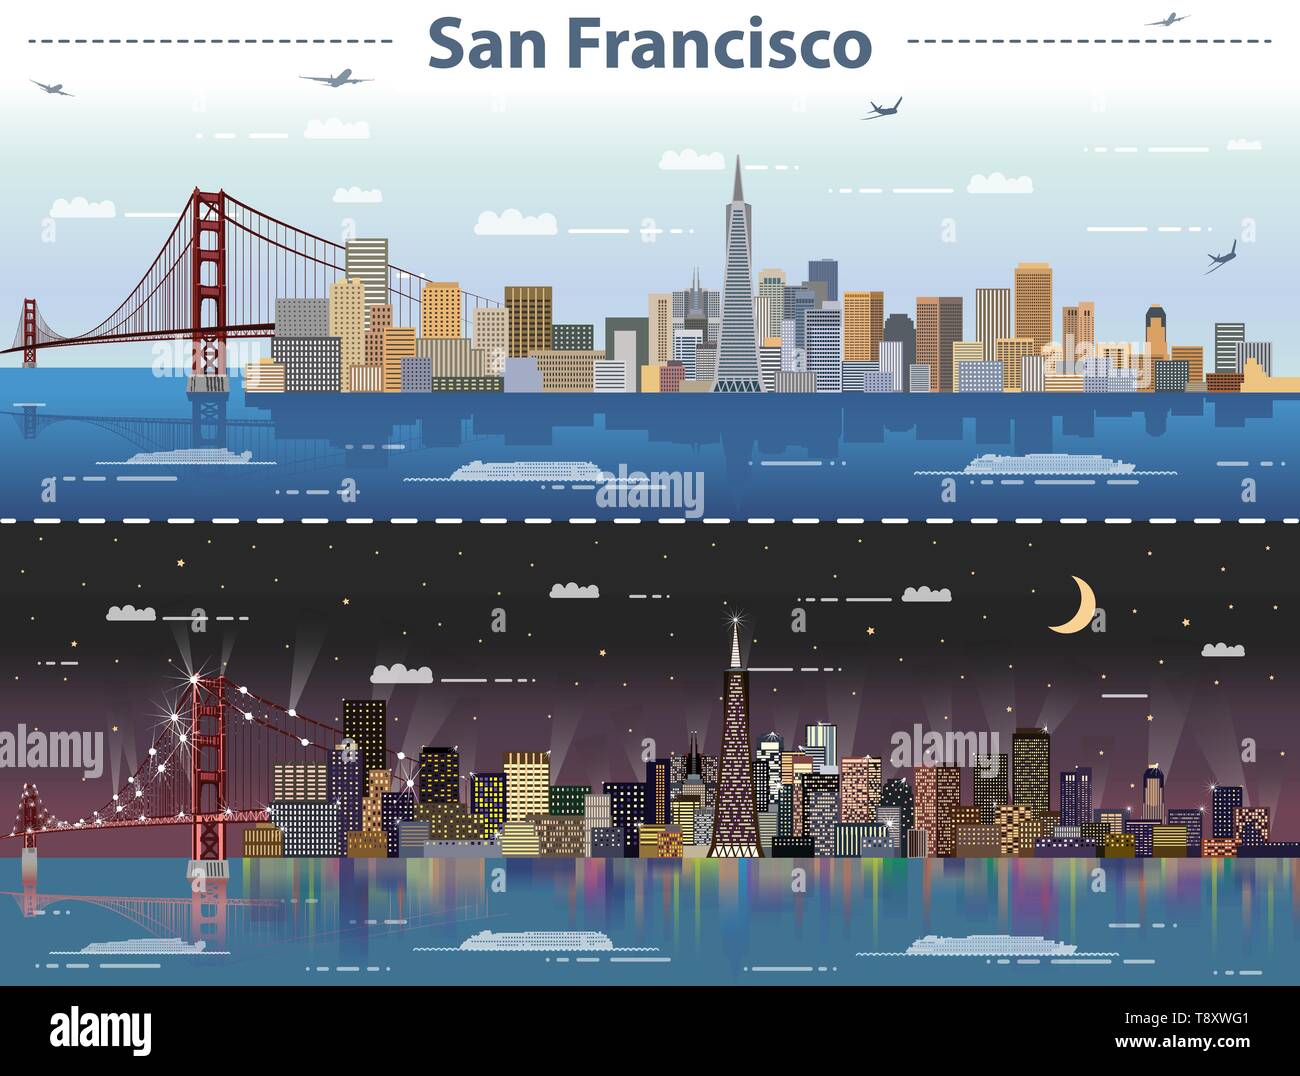 San Francisco city skyline at day and night vector illustration Stock Vector